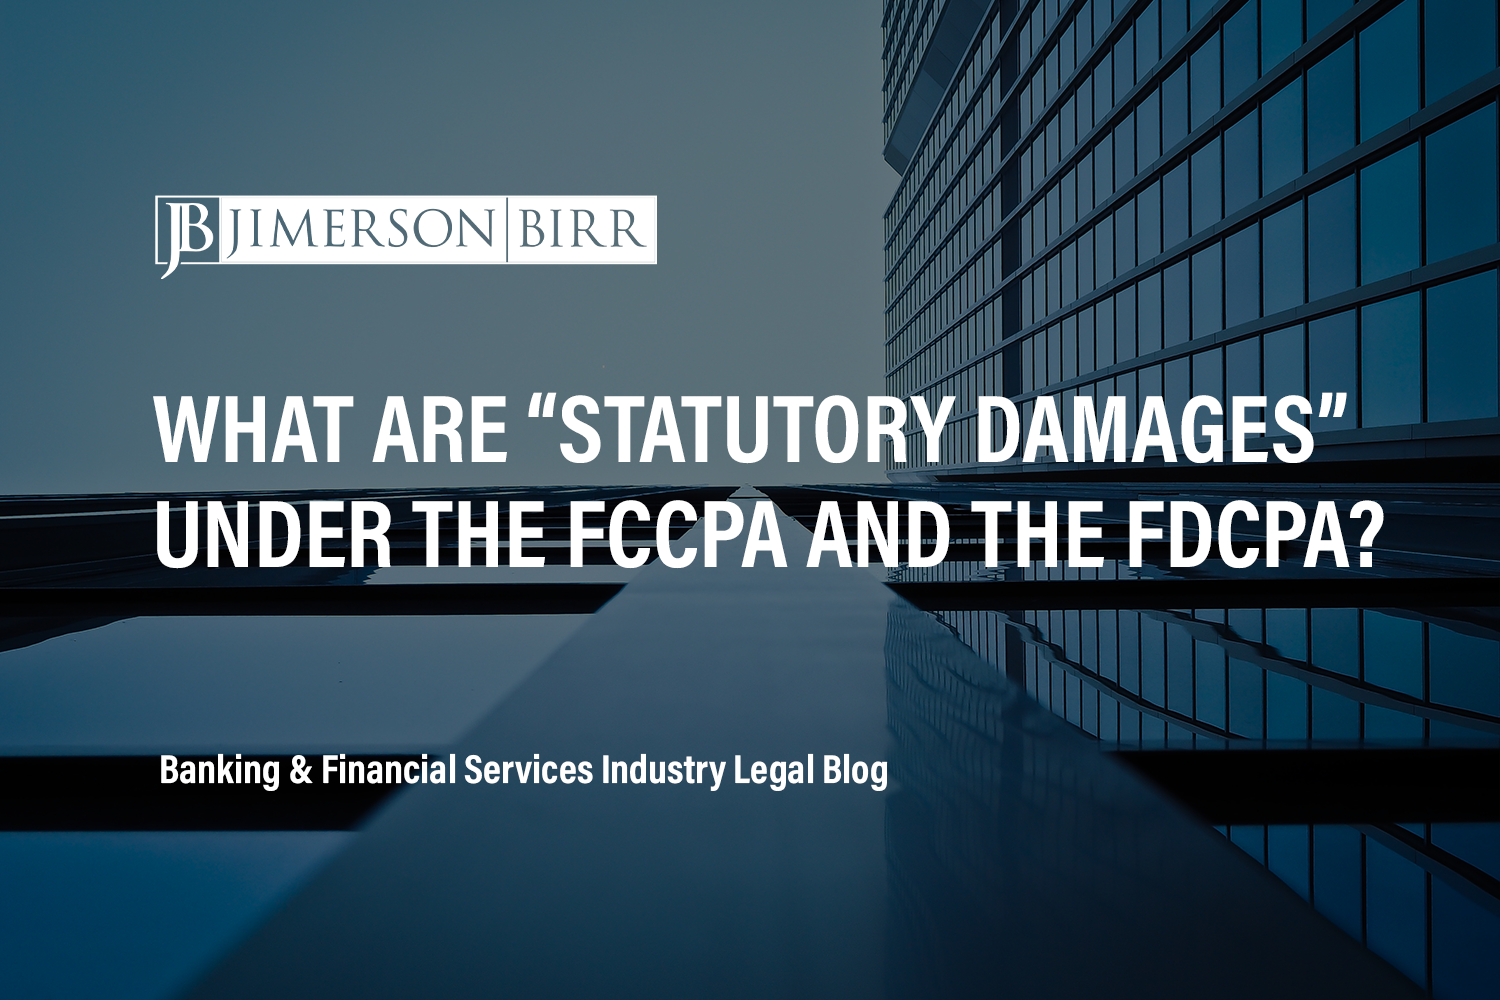 What Are “Statutory Damages” Under the FCCPA and the FDCPA?